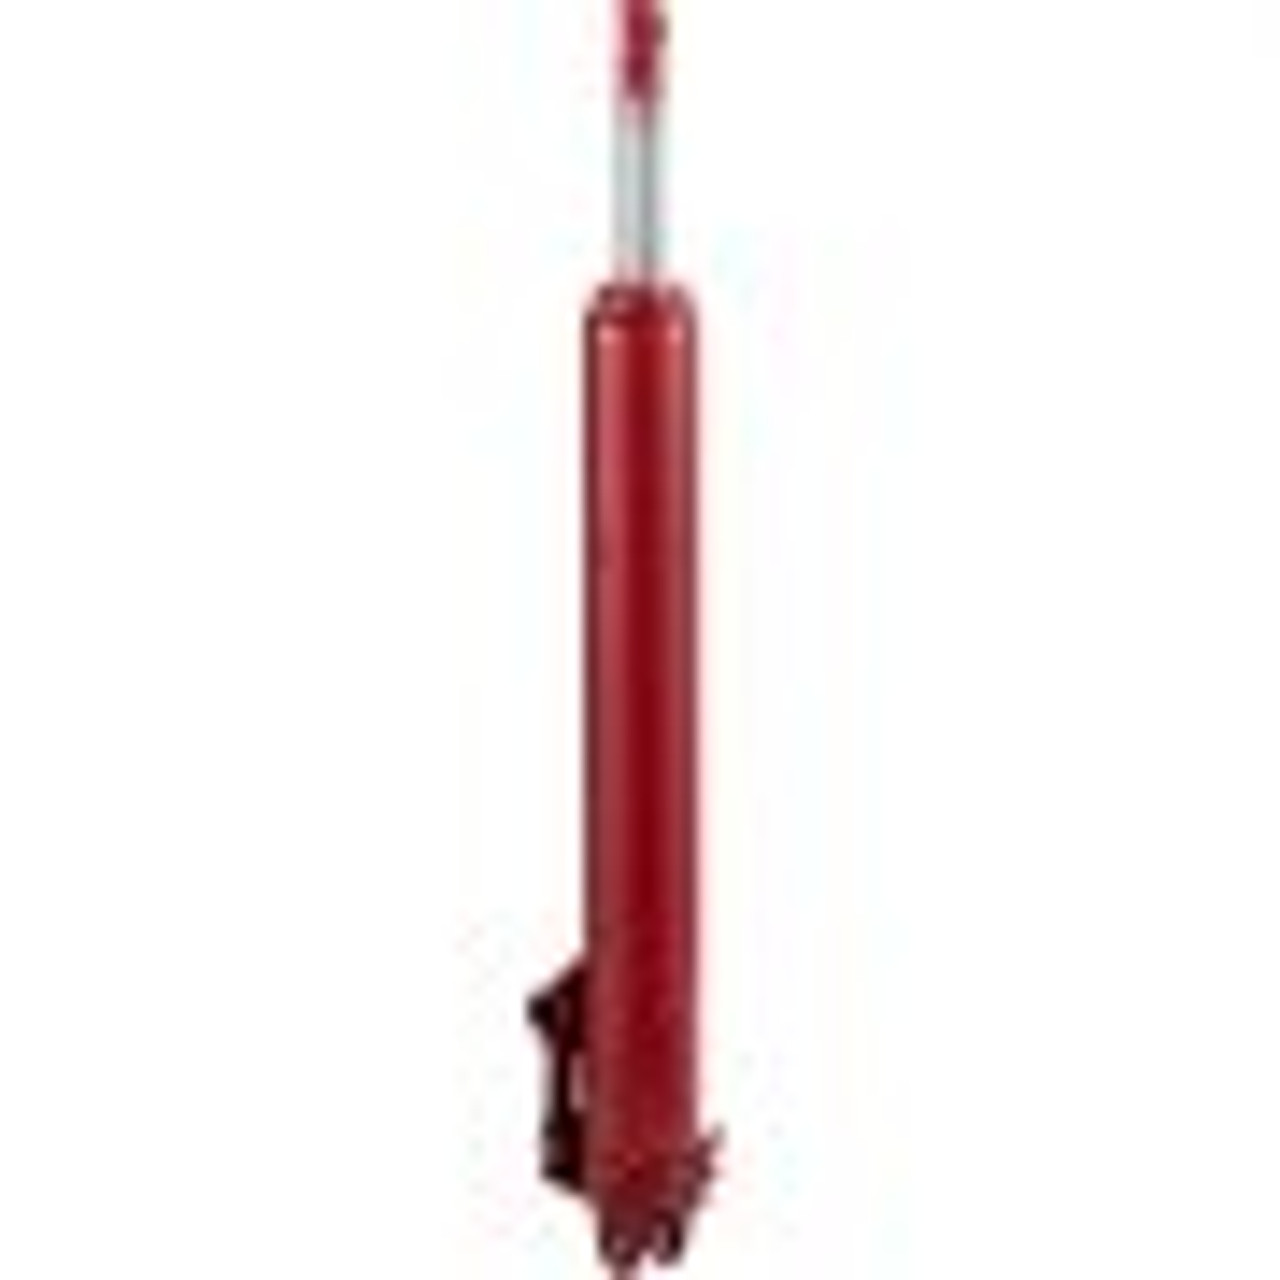 Hydraulic Long Ram Jack, 12 Tons/26455 lbs Capacity, with Single Piston Pump and Clevis Base, Manual Cherry Picker w/Handle, for Garage/Shop Cranes, Engine Lift Hoist, Red